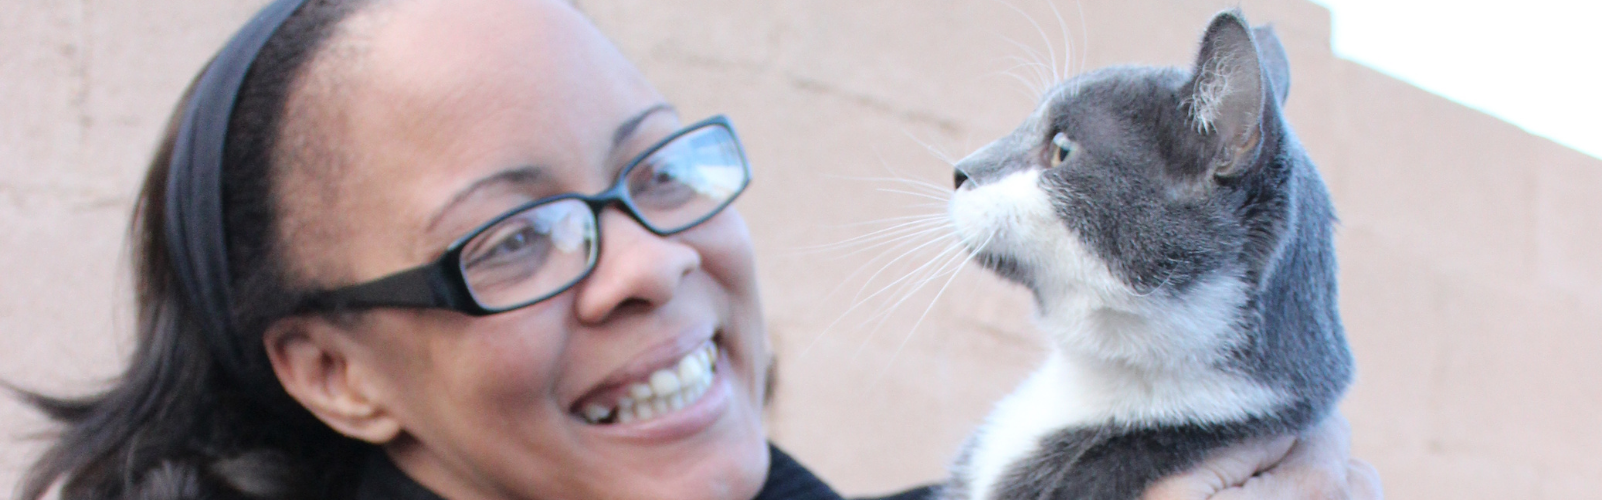 black woman holding up and smiling at her grey and white cat